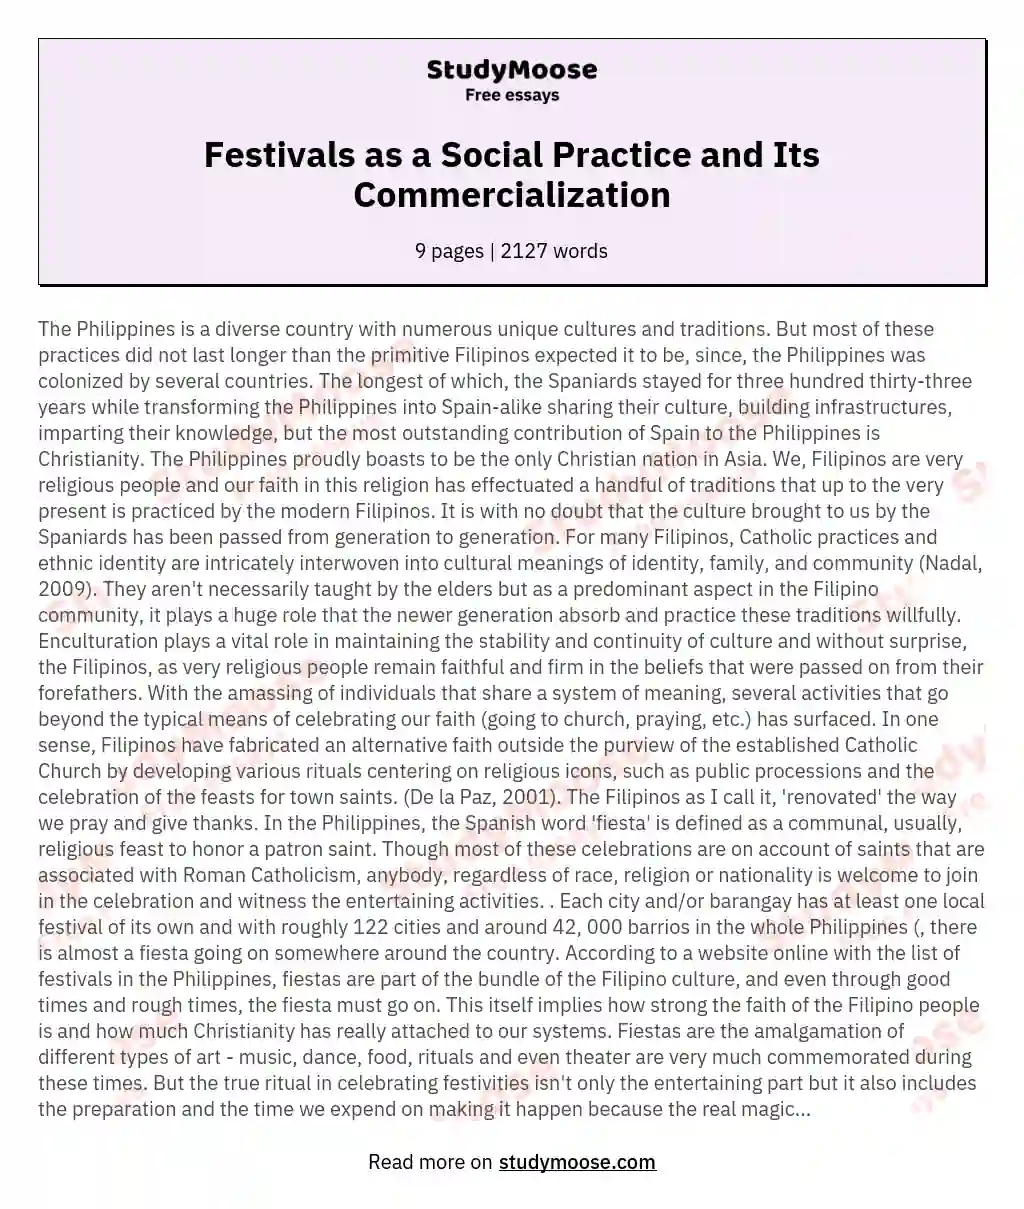 Festivals as a Social Practice and Its Commercialization essay